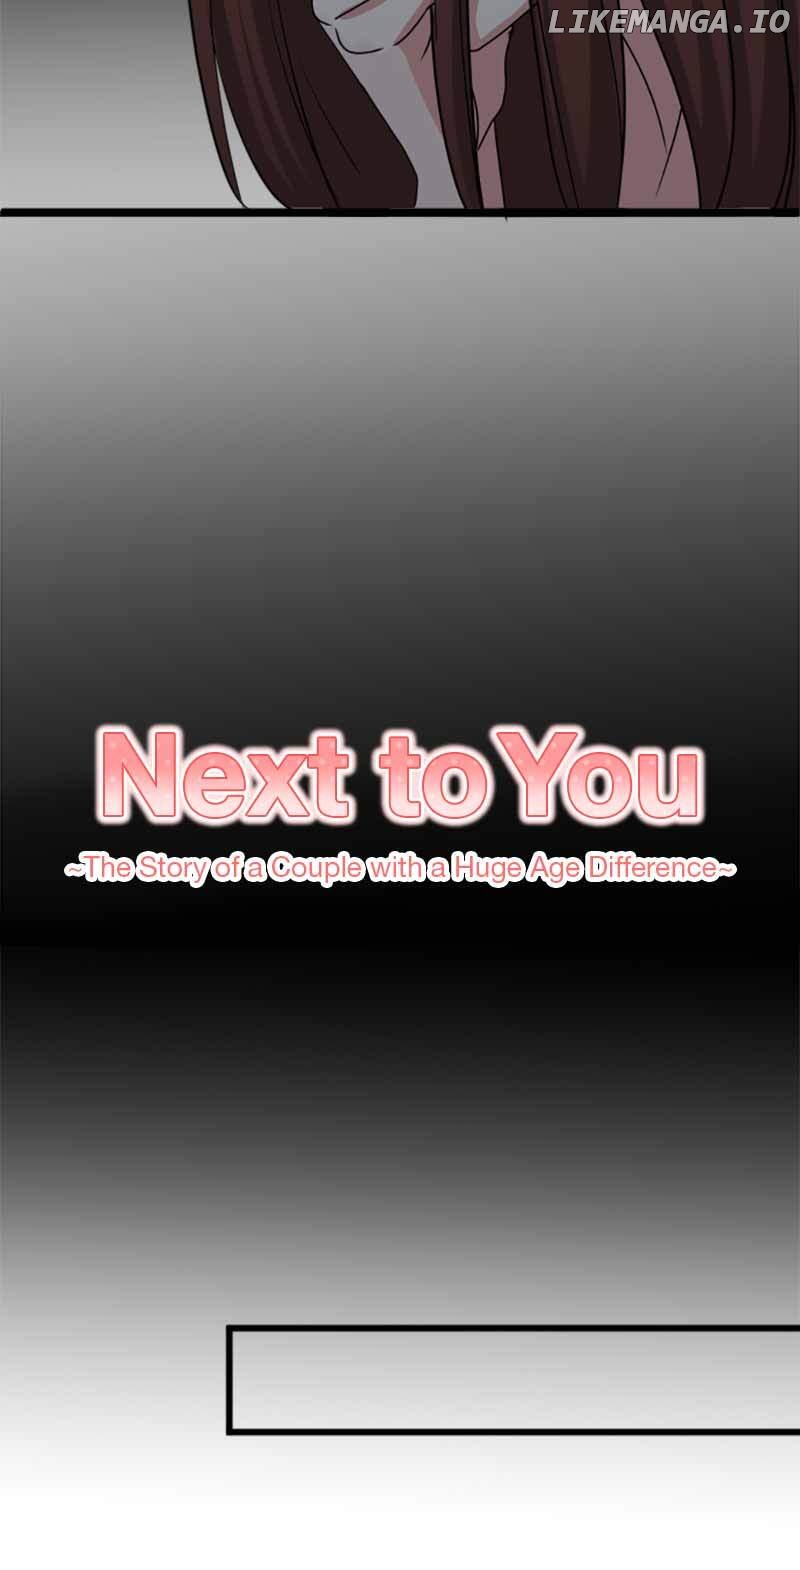 Next to You ~The Story of a Couple with a Huge Age Difference~ Chapter 179 - p2.95 - page 4